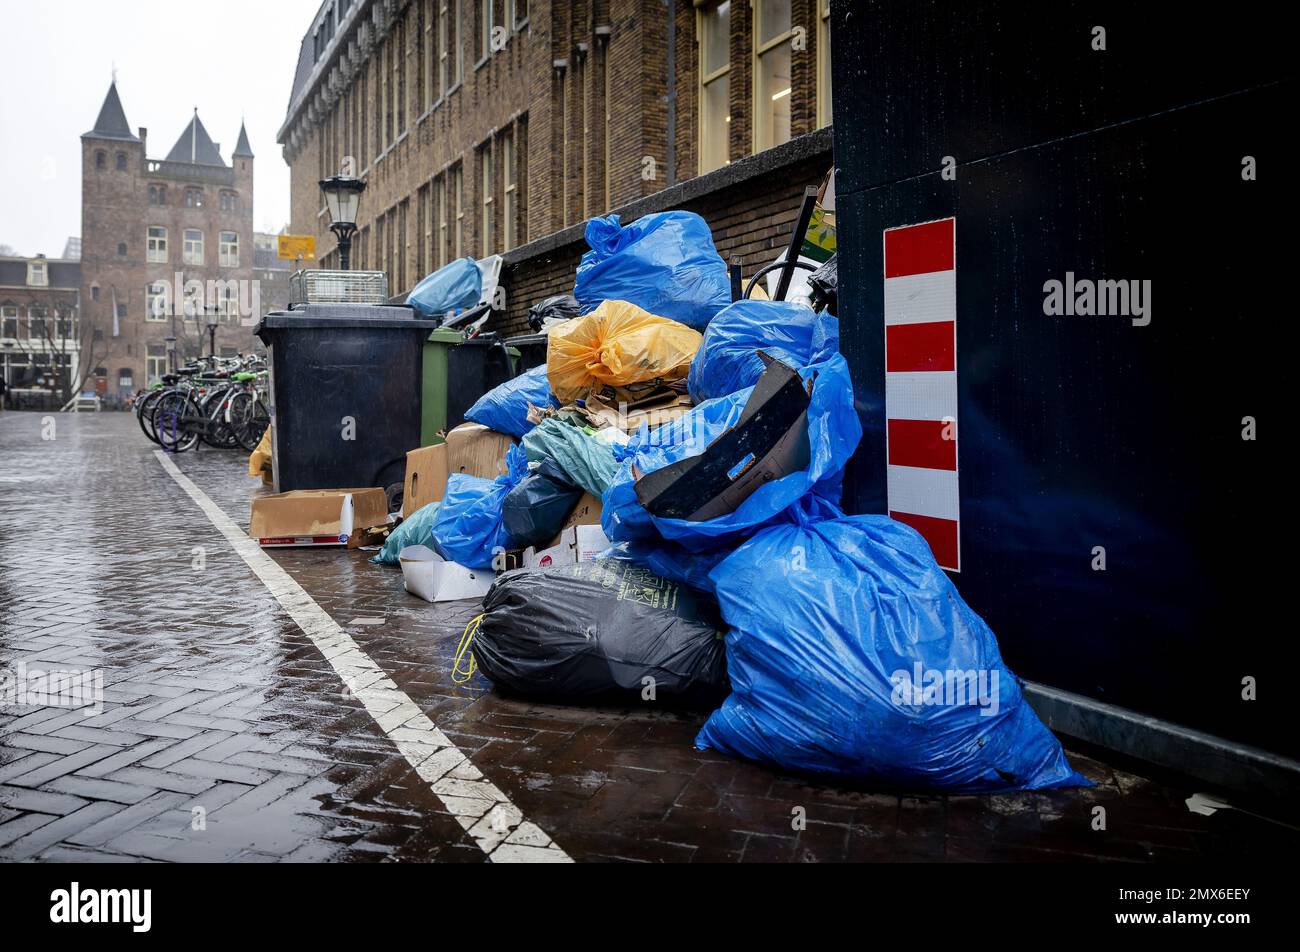 UTRECHT - Garbage is piling up now that city cleaning is taking action in the No waste will be collected for week. The municipal employees have stopped work of